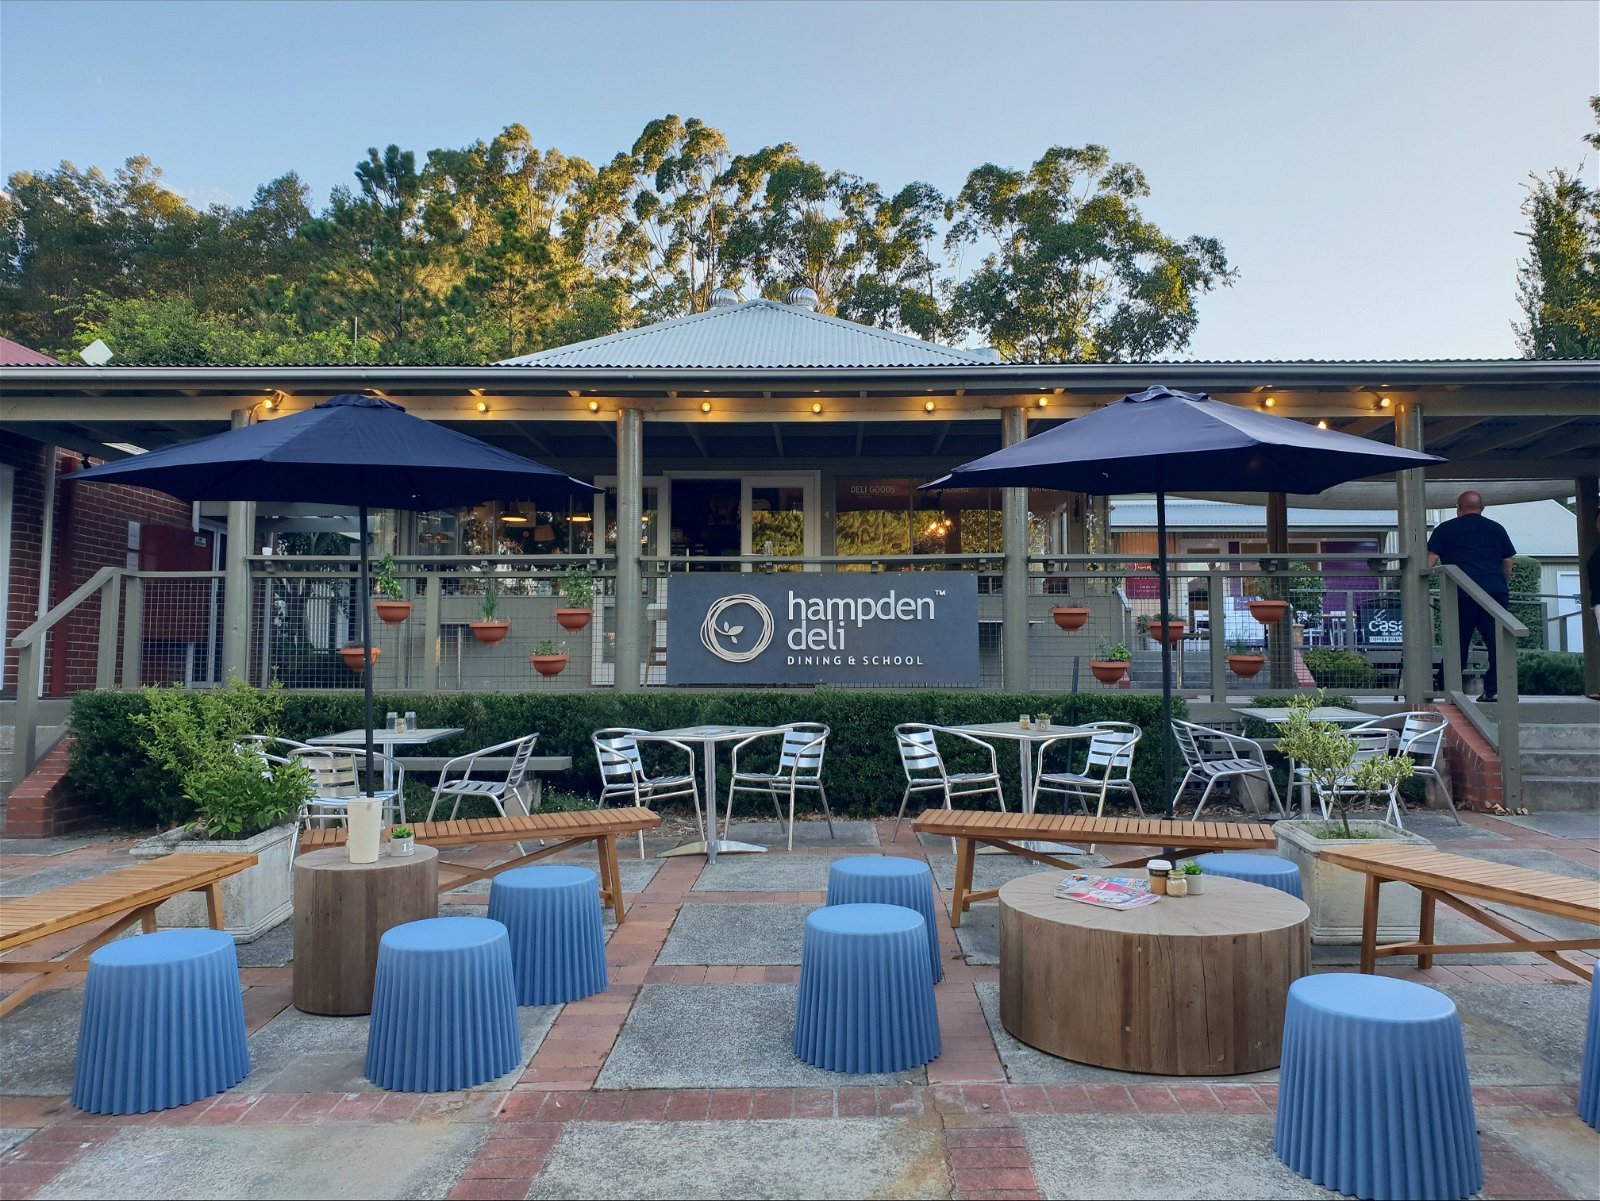 Hampden Deli Dining and School - New South Wales Tourism 